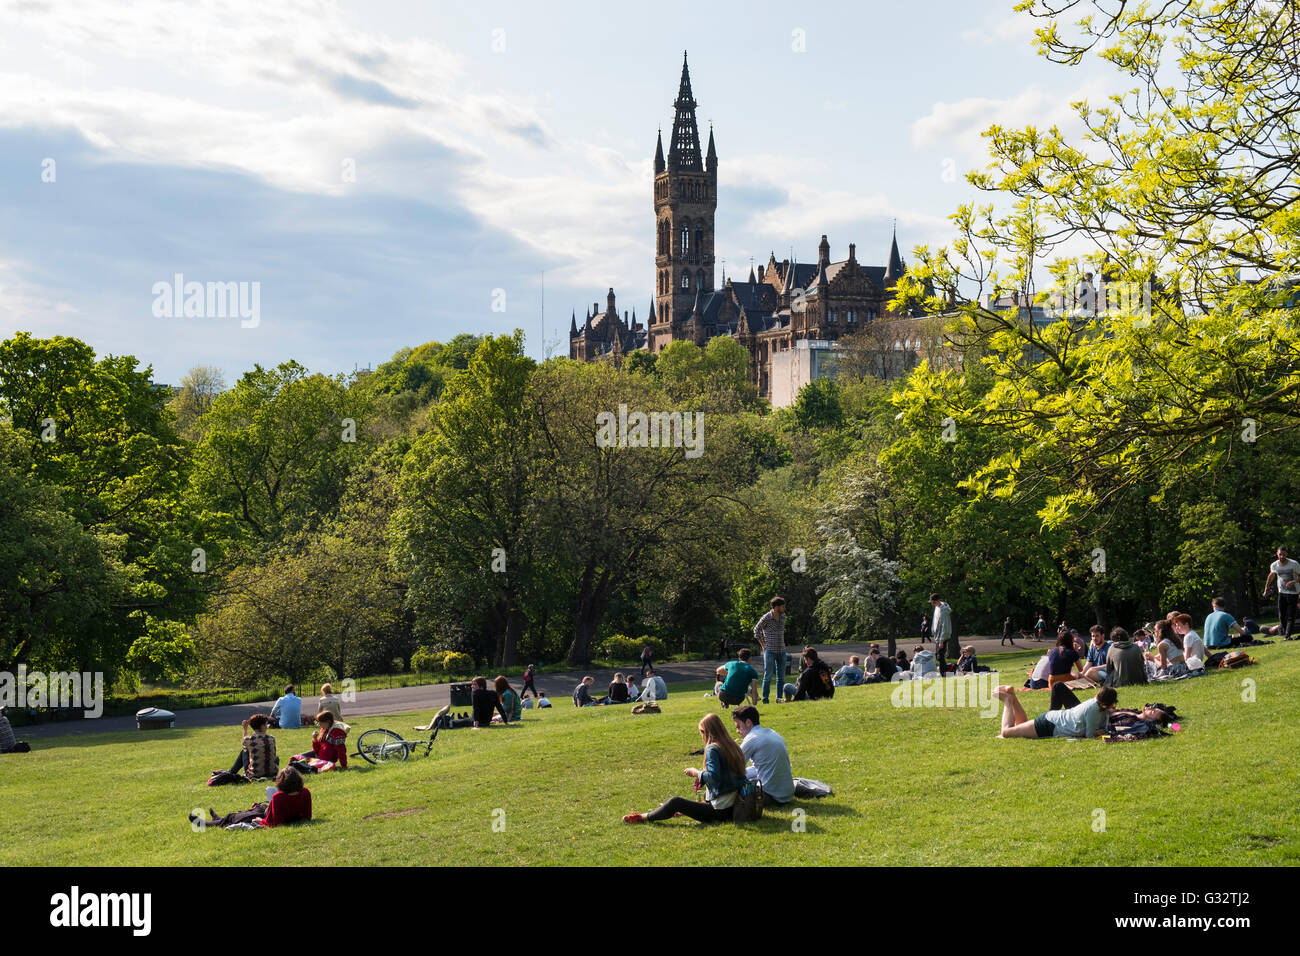 Students relaxing on lawns of Kelvingrove Park with Glasgow university in the distance in Scotland, United Kingdom Stock Photo